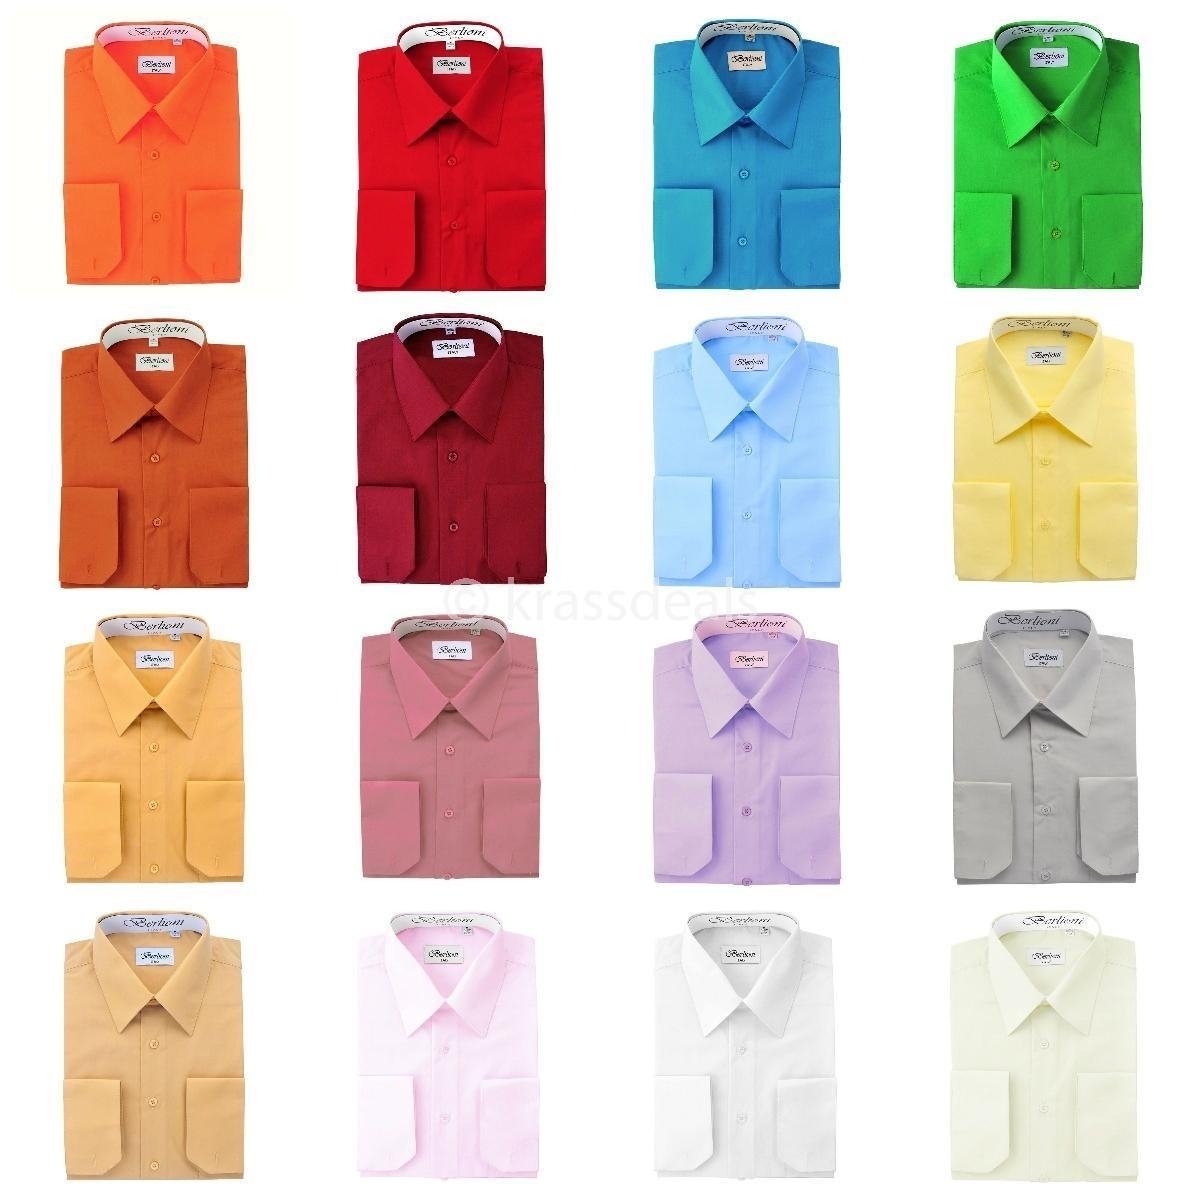 Dress Shirts Many Colors Takes Cuff Links